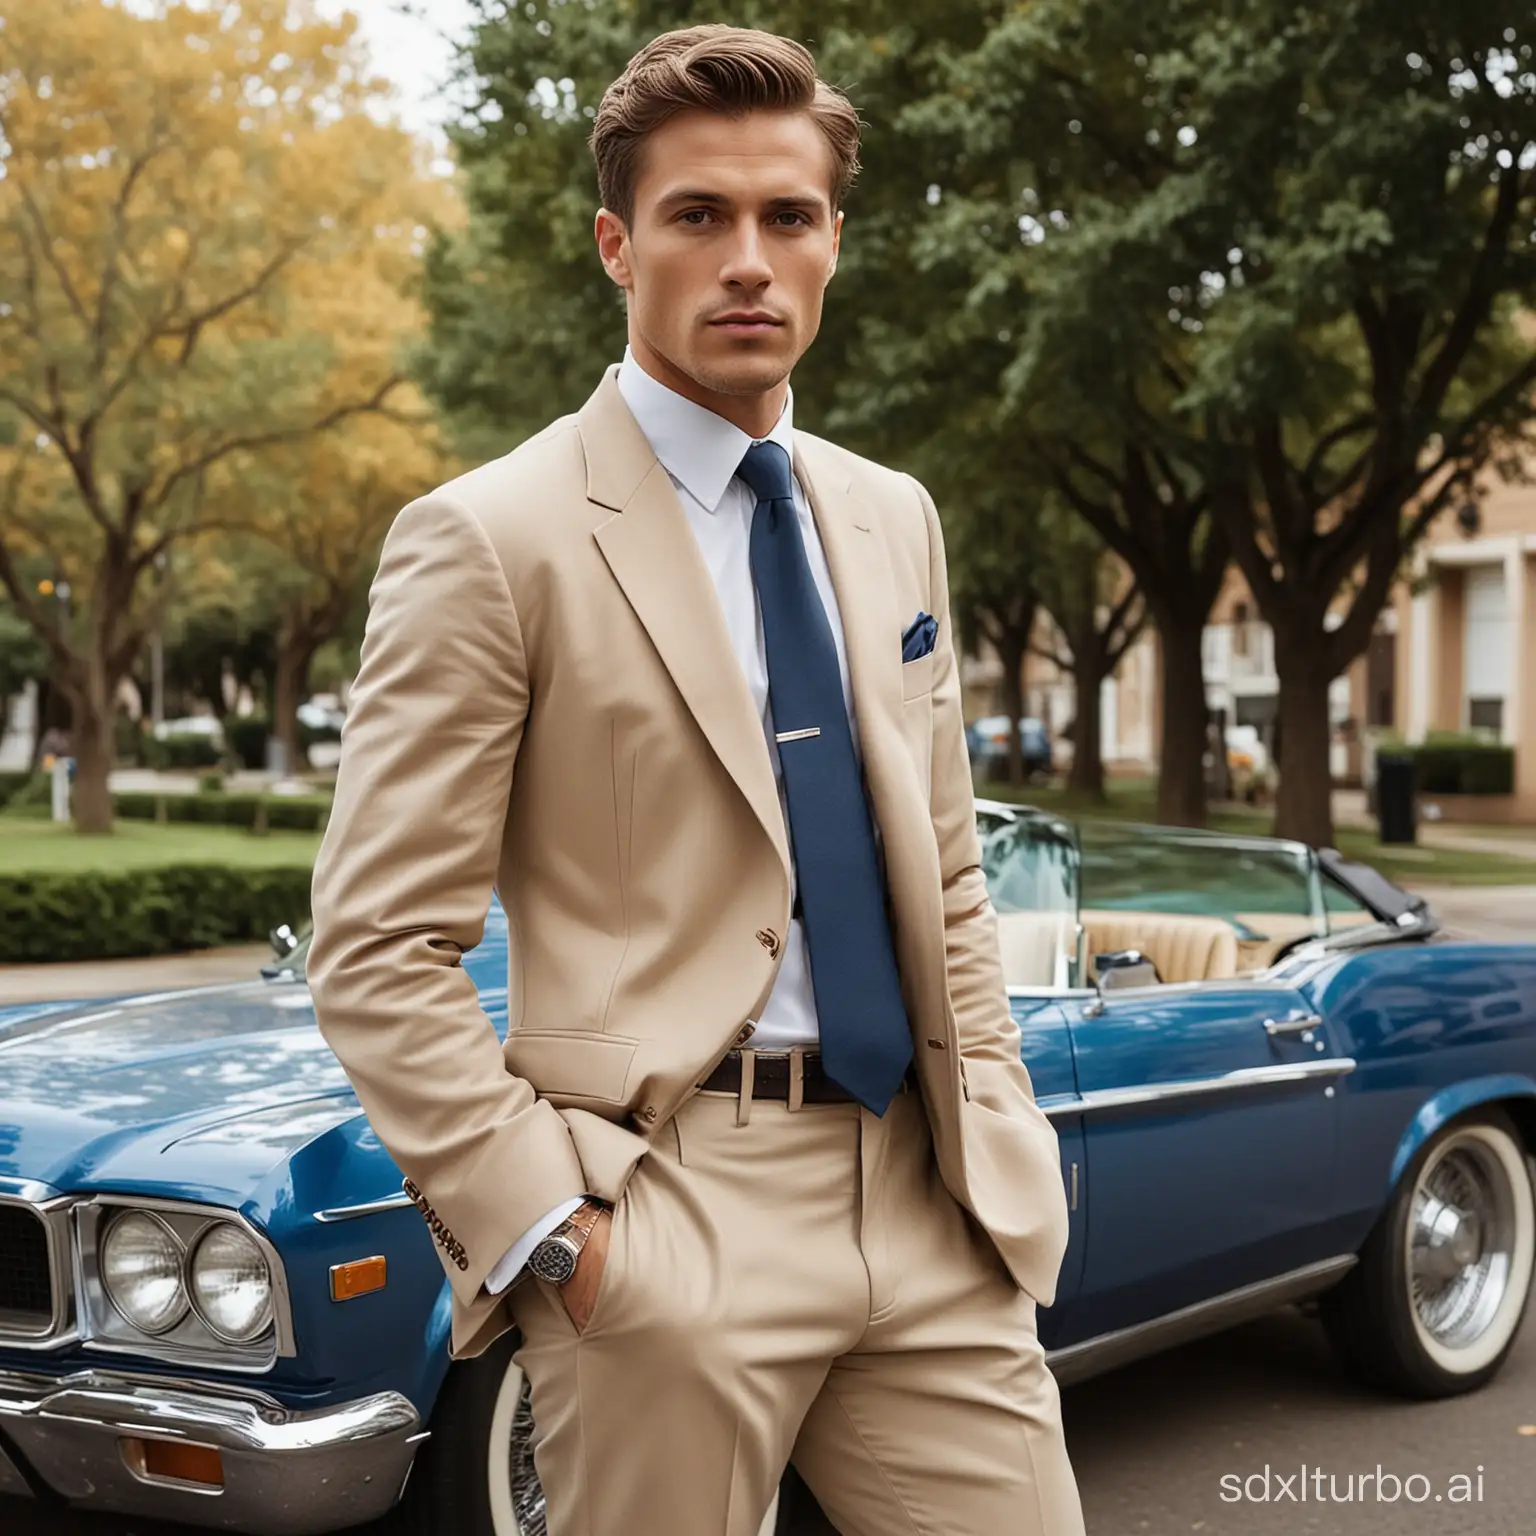 Confident-Man-in-Tan-Suit-with-Stylish-Accessories-on-Urban-Street